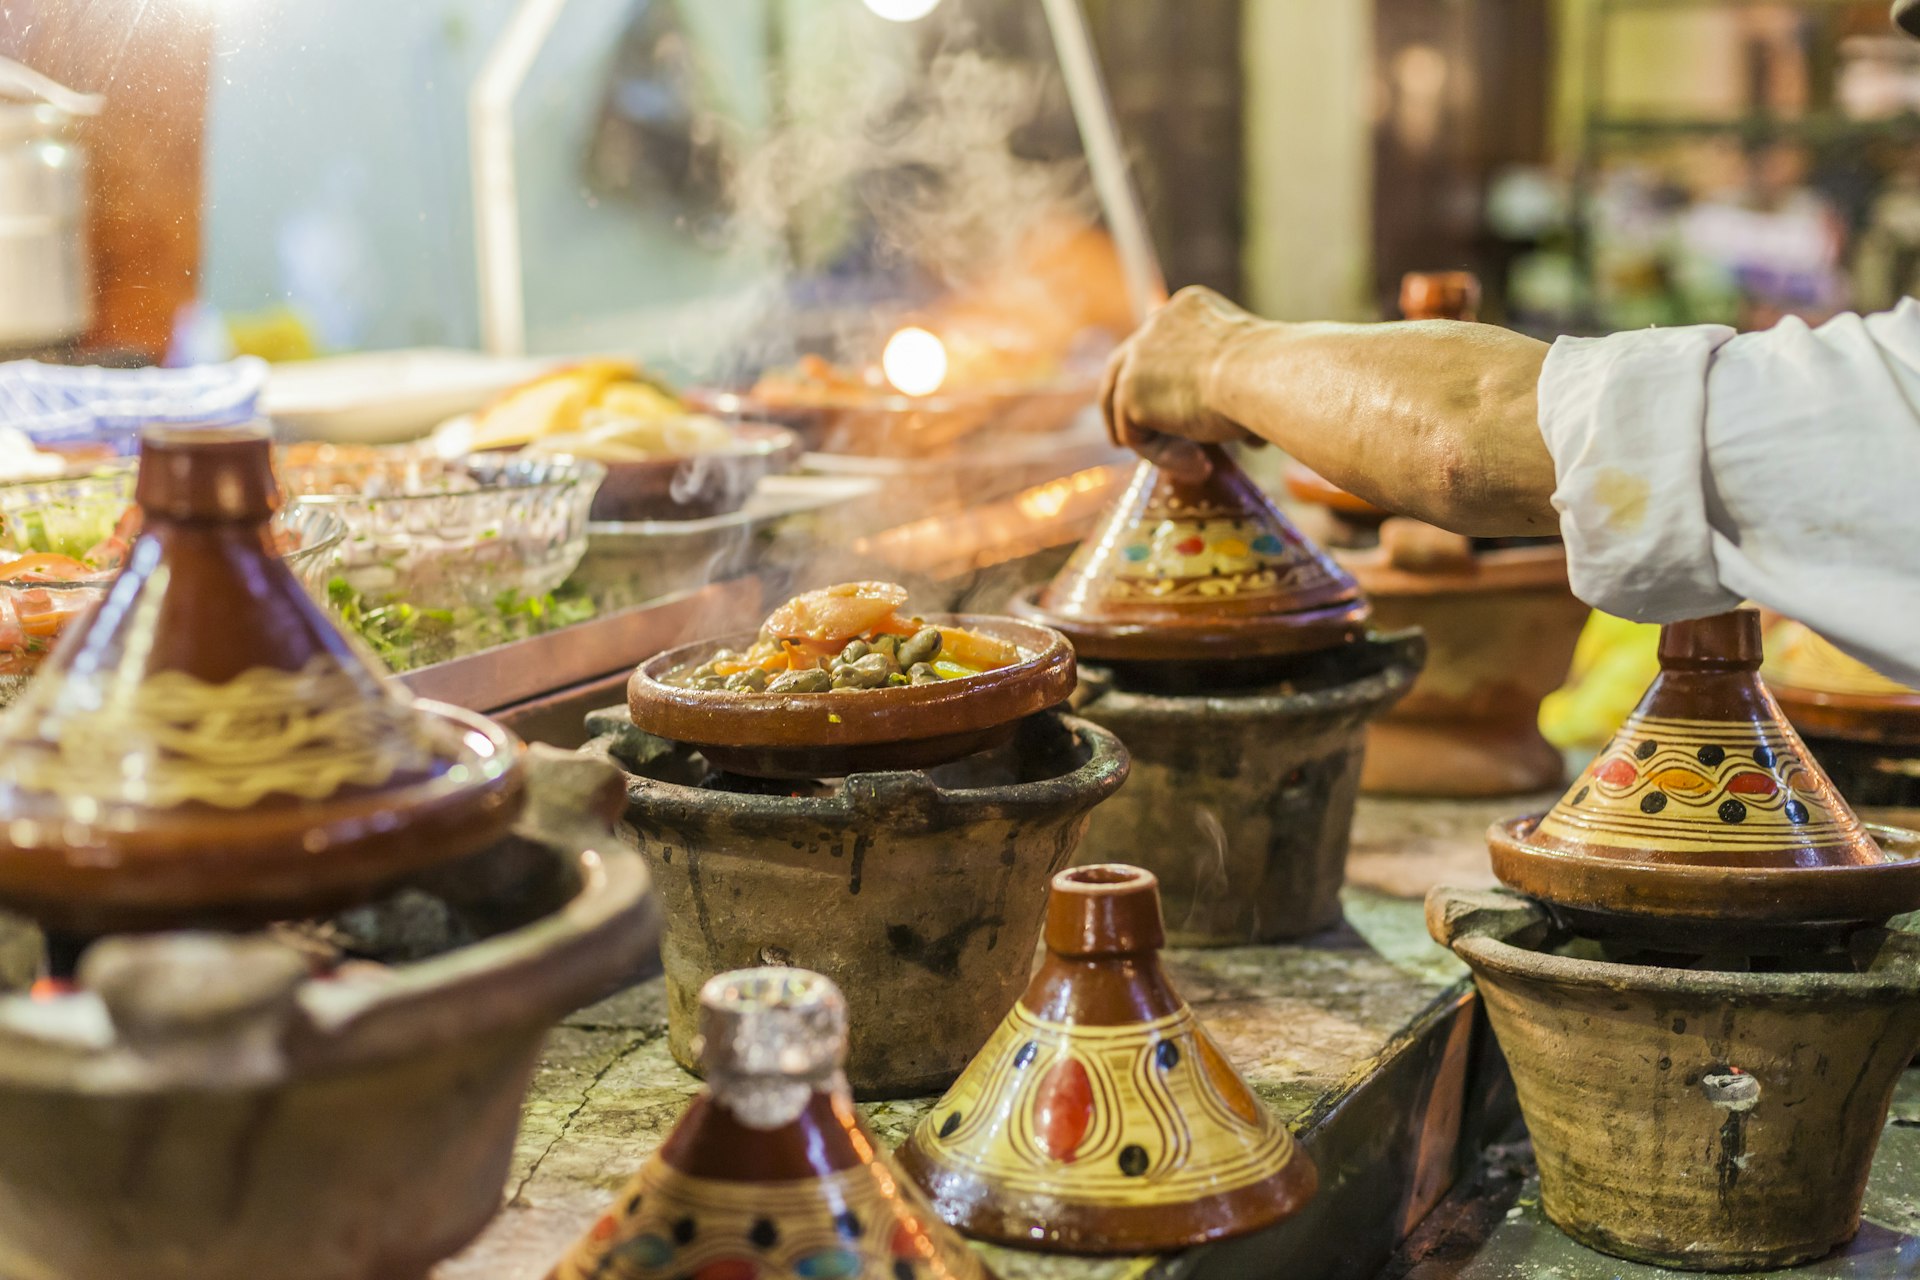 Selection of very colorful Moroccan tajines (traditional casserole dishes) in a Moroccan restaurant